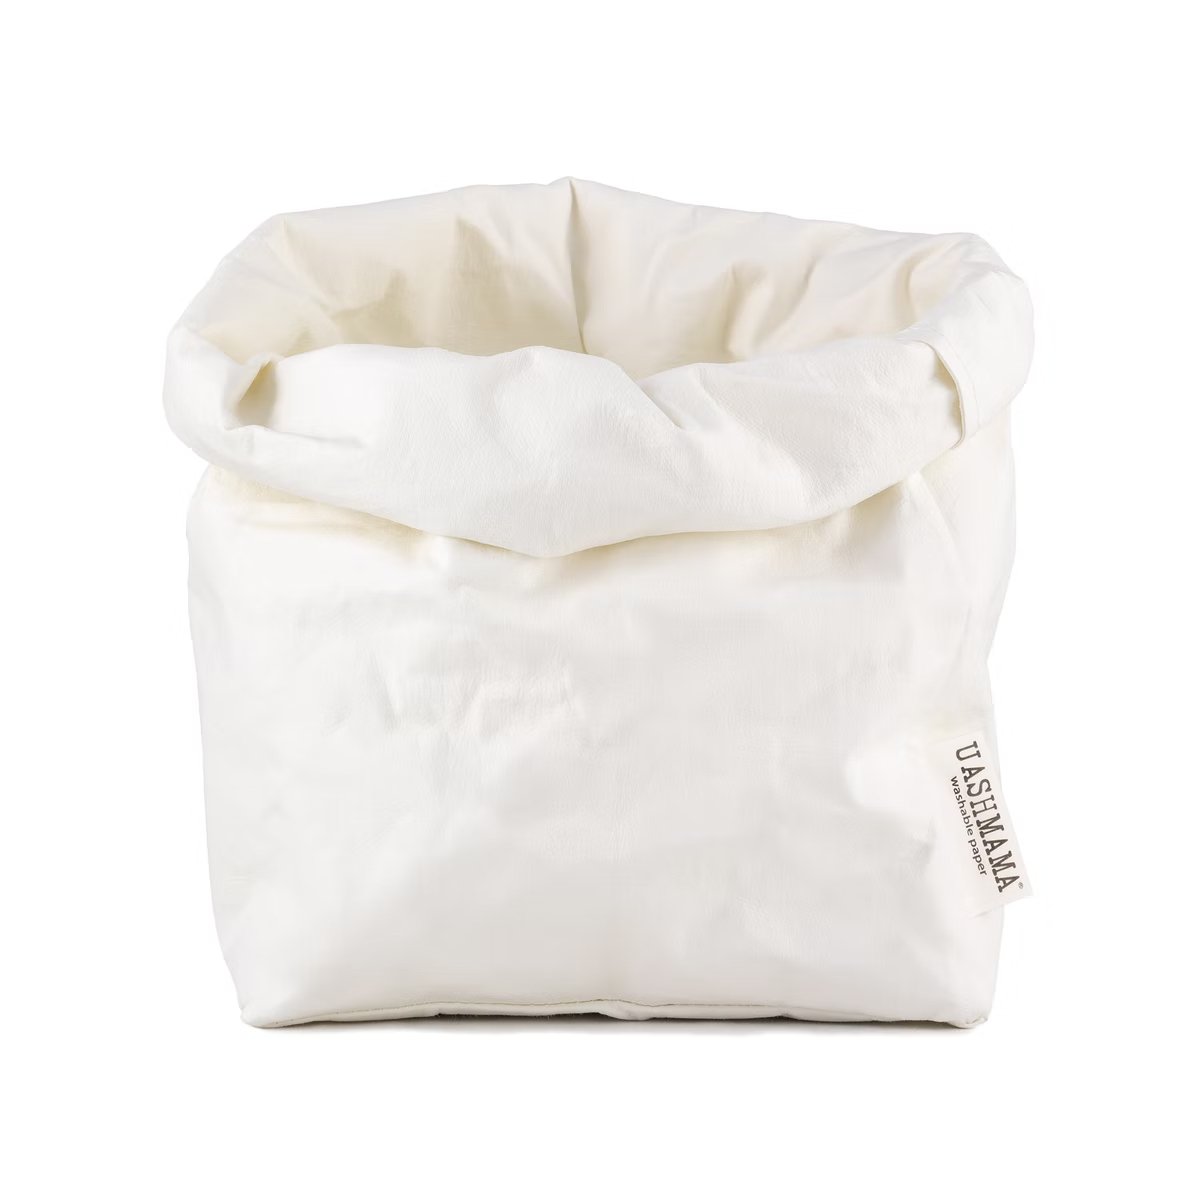 A washable paper bag is shown. The bag is rolled down at the top and features a UASHMAMA logo label on the bottom left corner. The bag pictured is the large plus size in white.